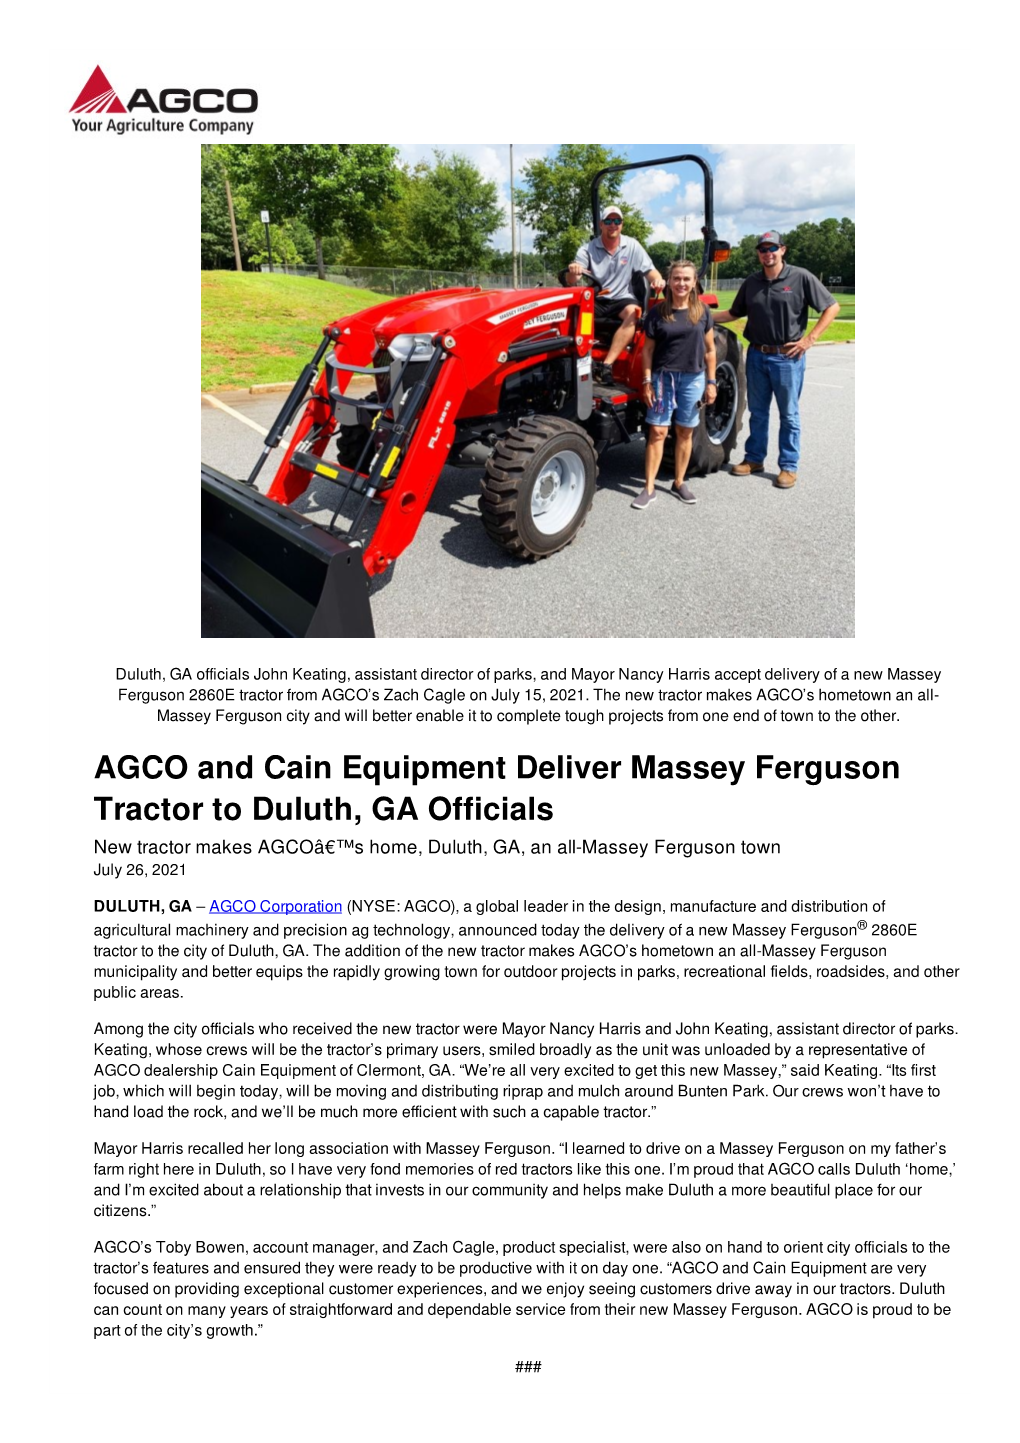 AGCO and Cain Equipment Deliver Massey Ferguson Tractor to Duluth, GA Officials New Tractor Makes Agcoâ€™S Home, Duluth, GA, an All-Massey Ferguson Town July 26, 2021